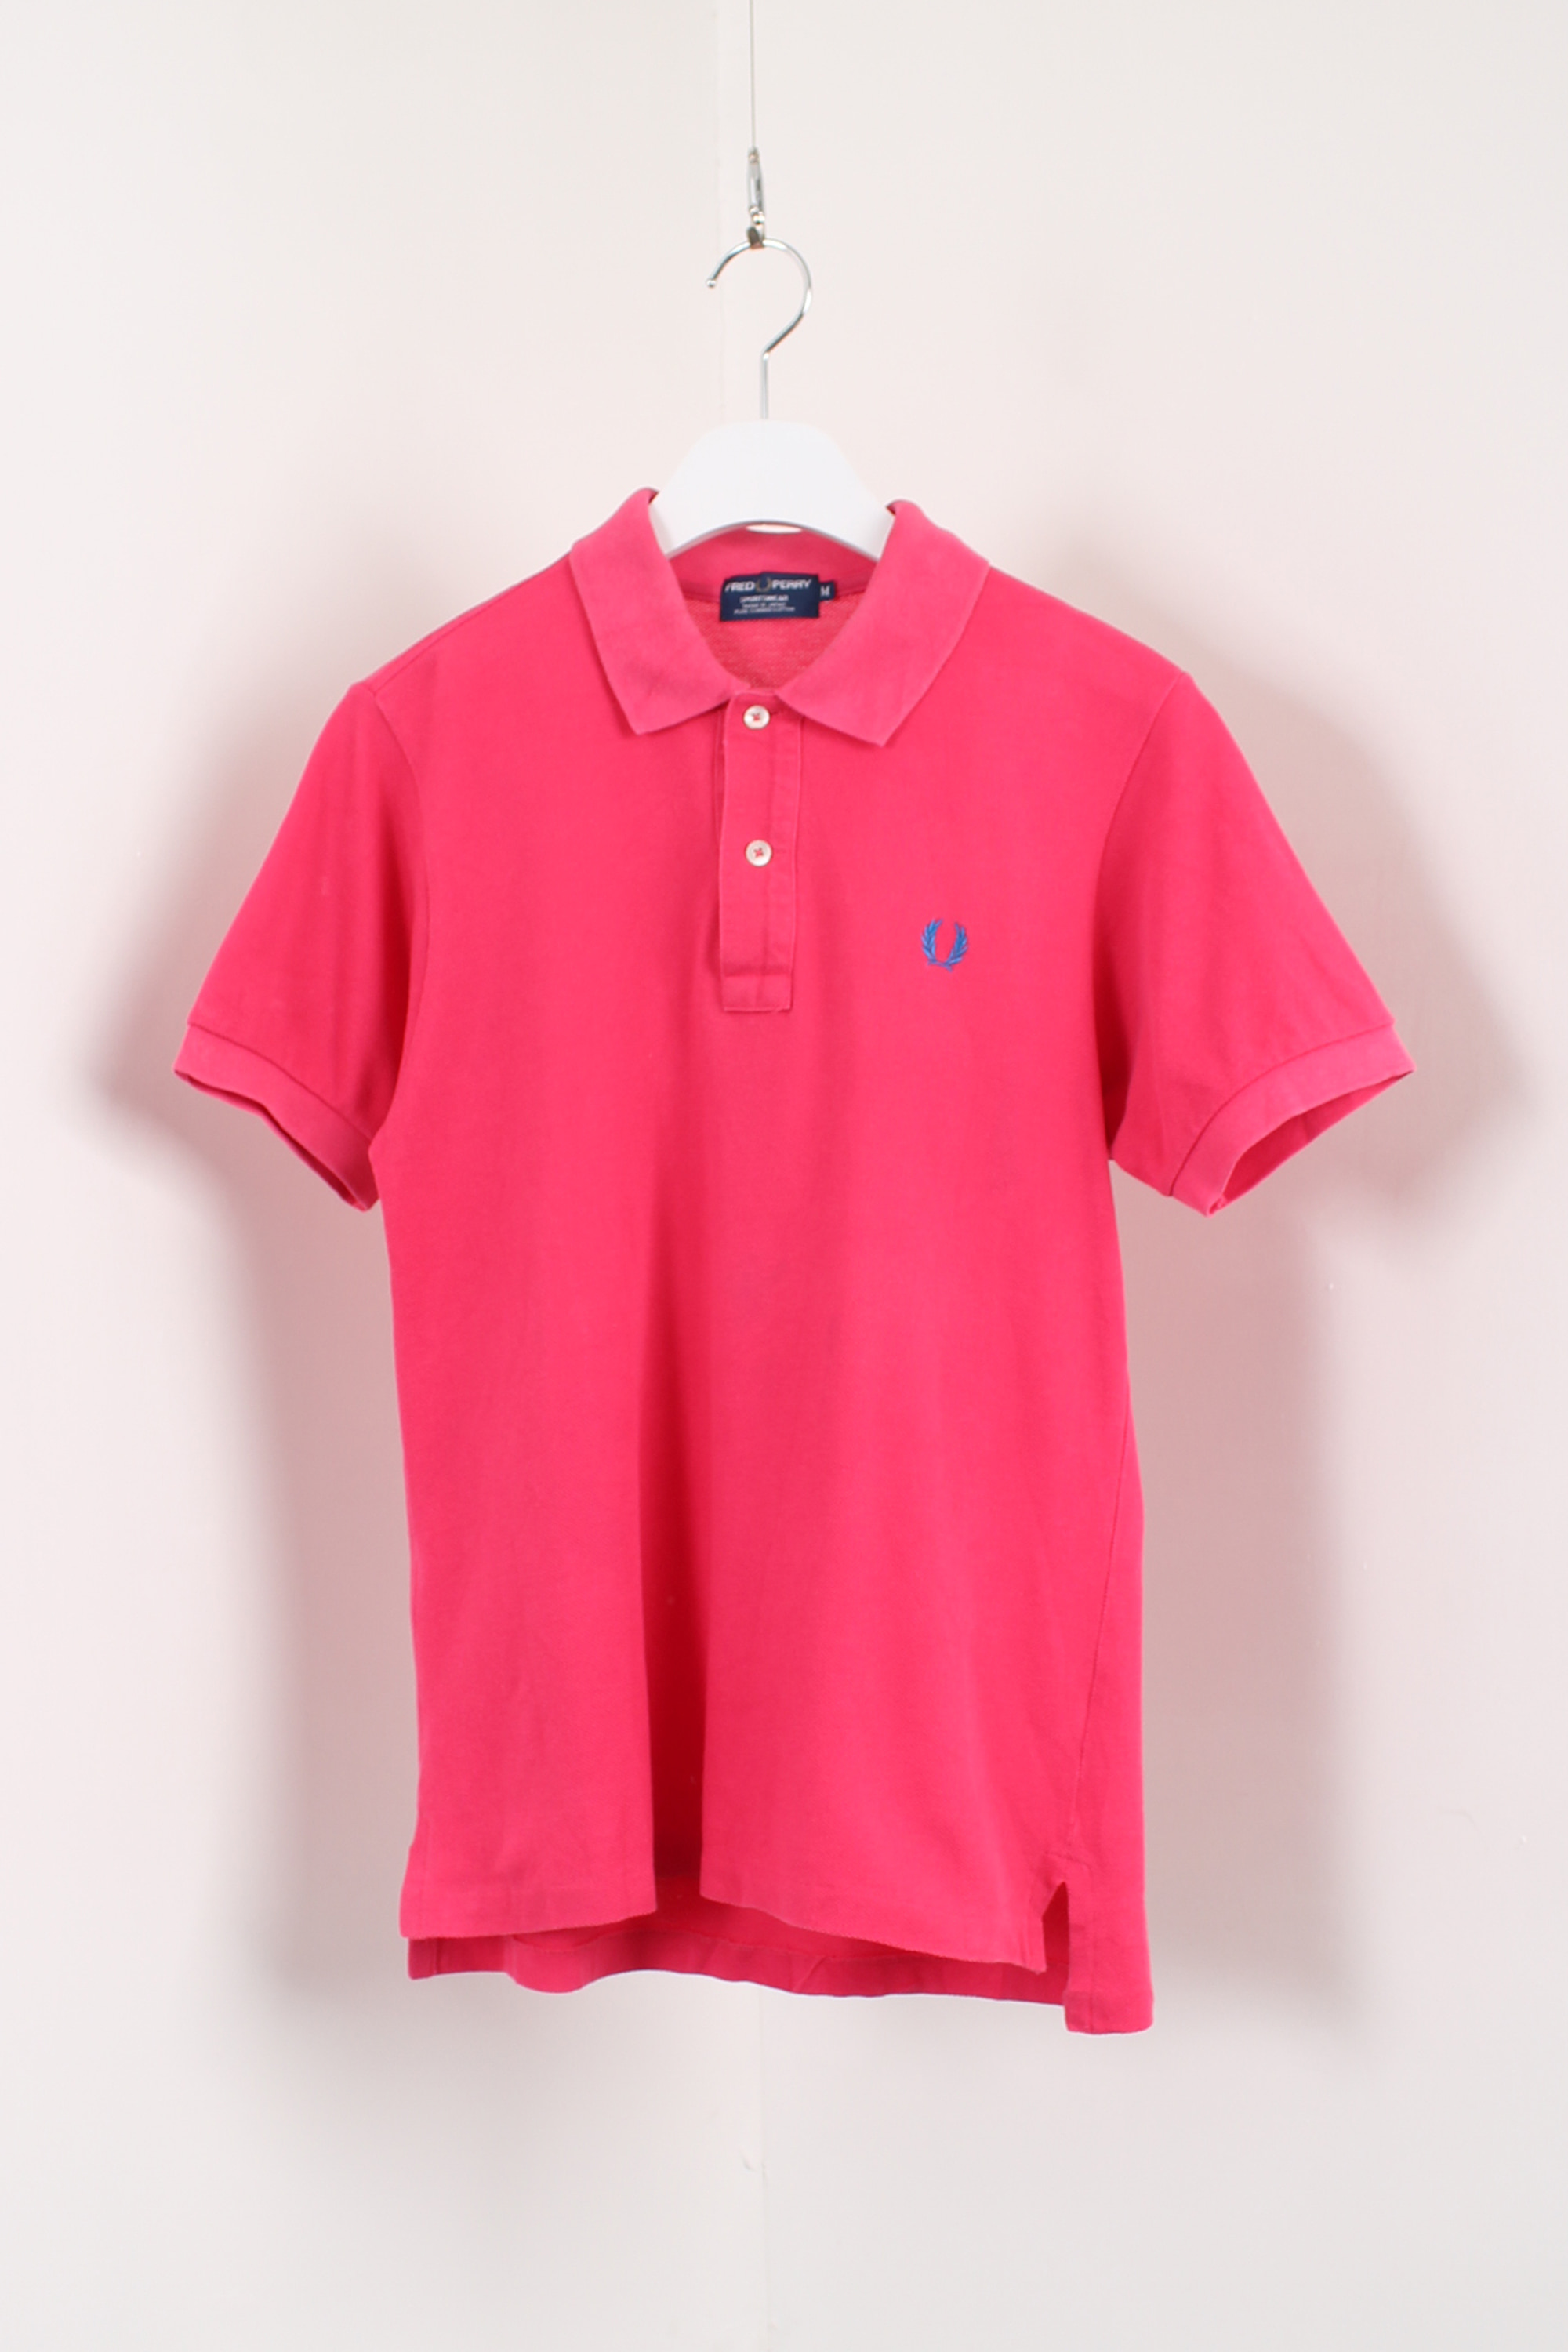 fred perry pique shirt